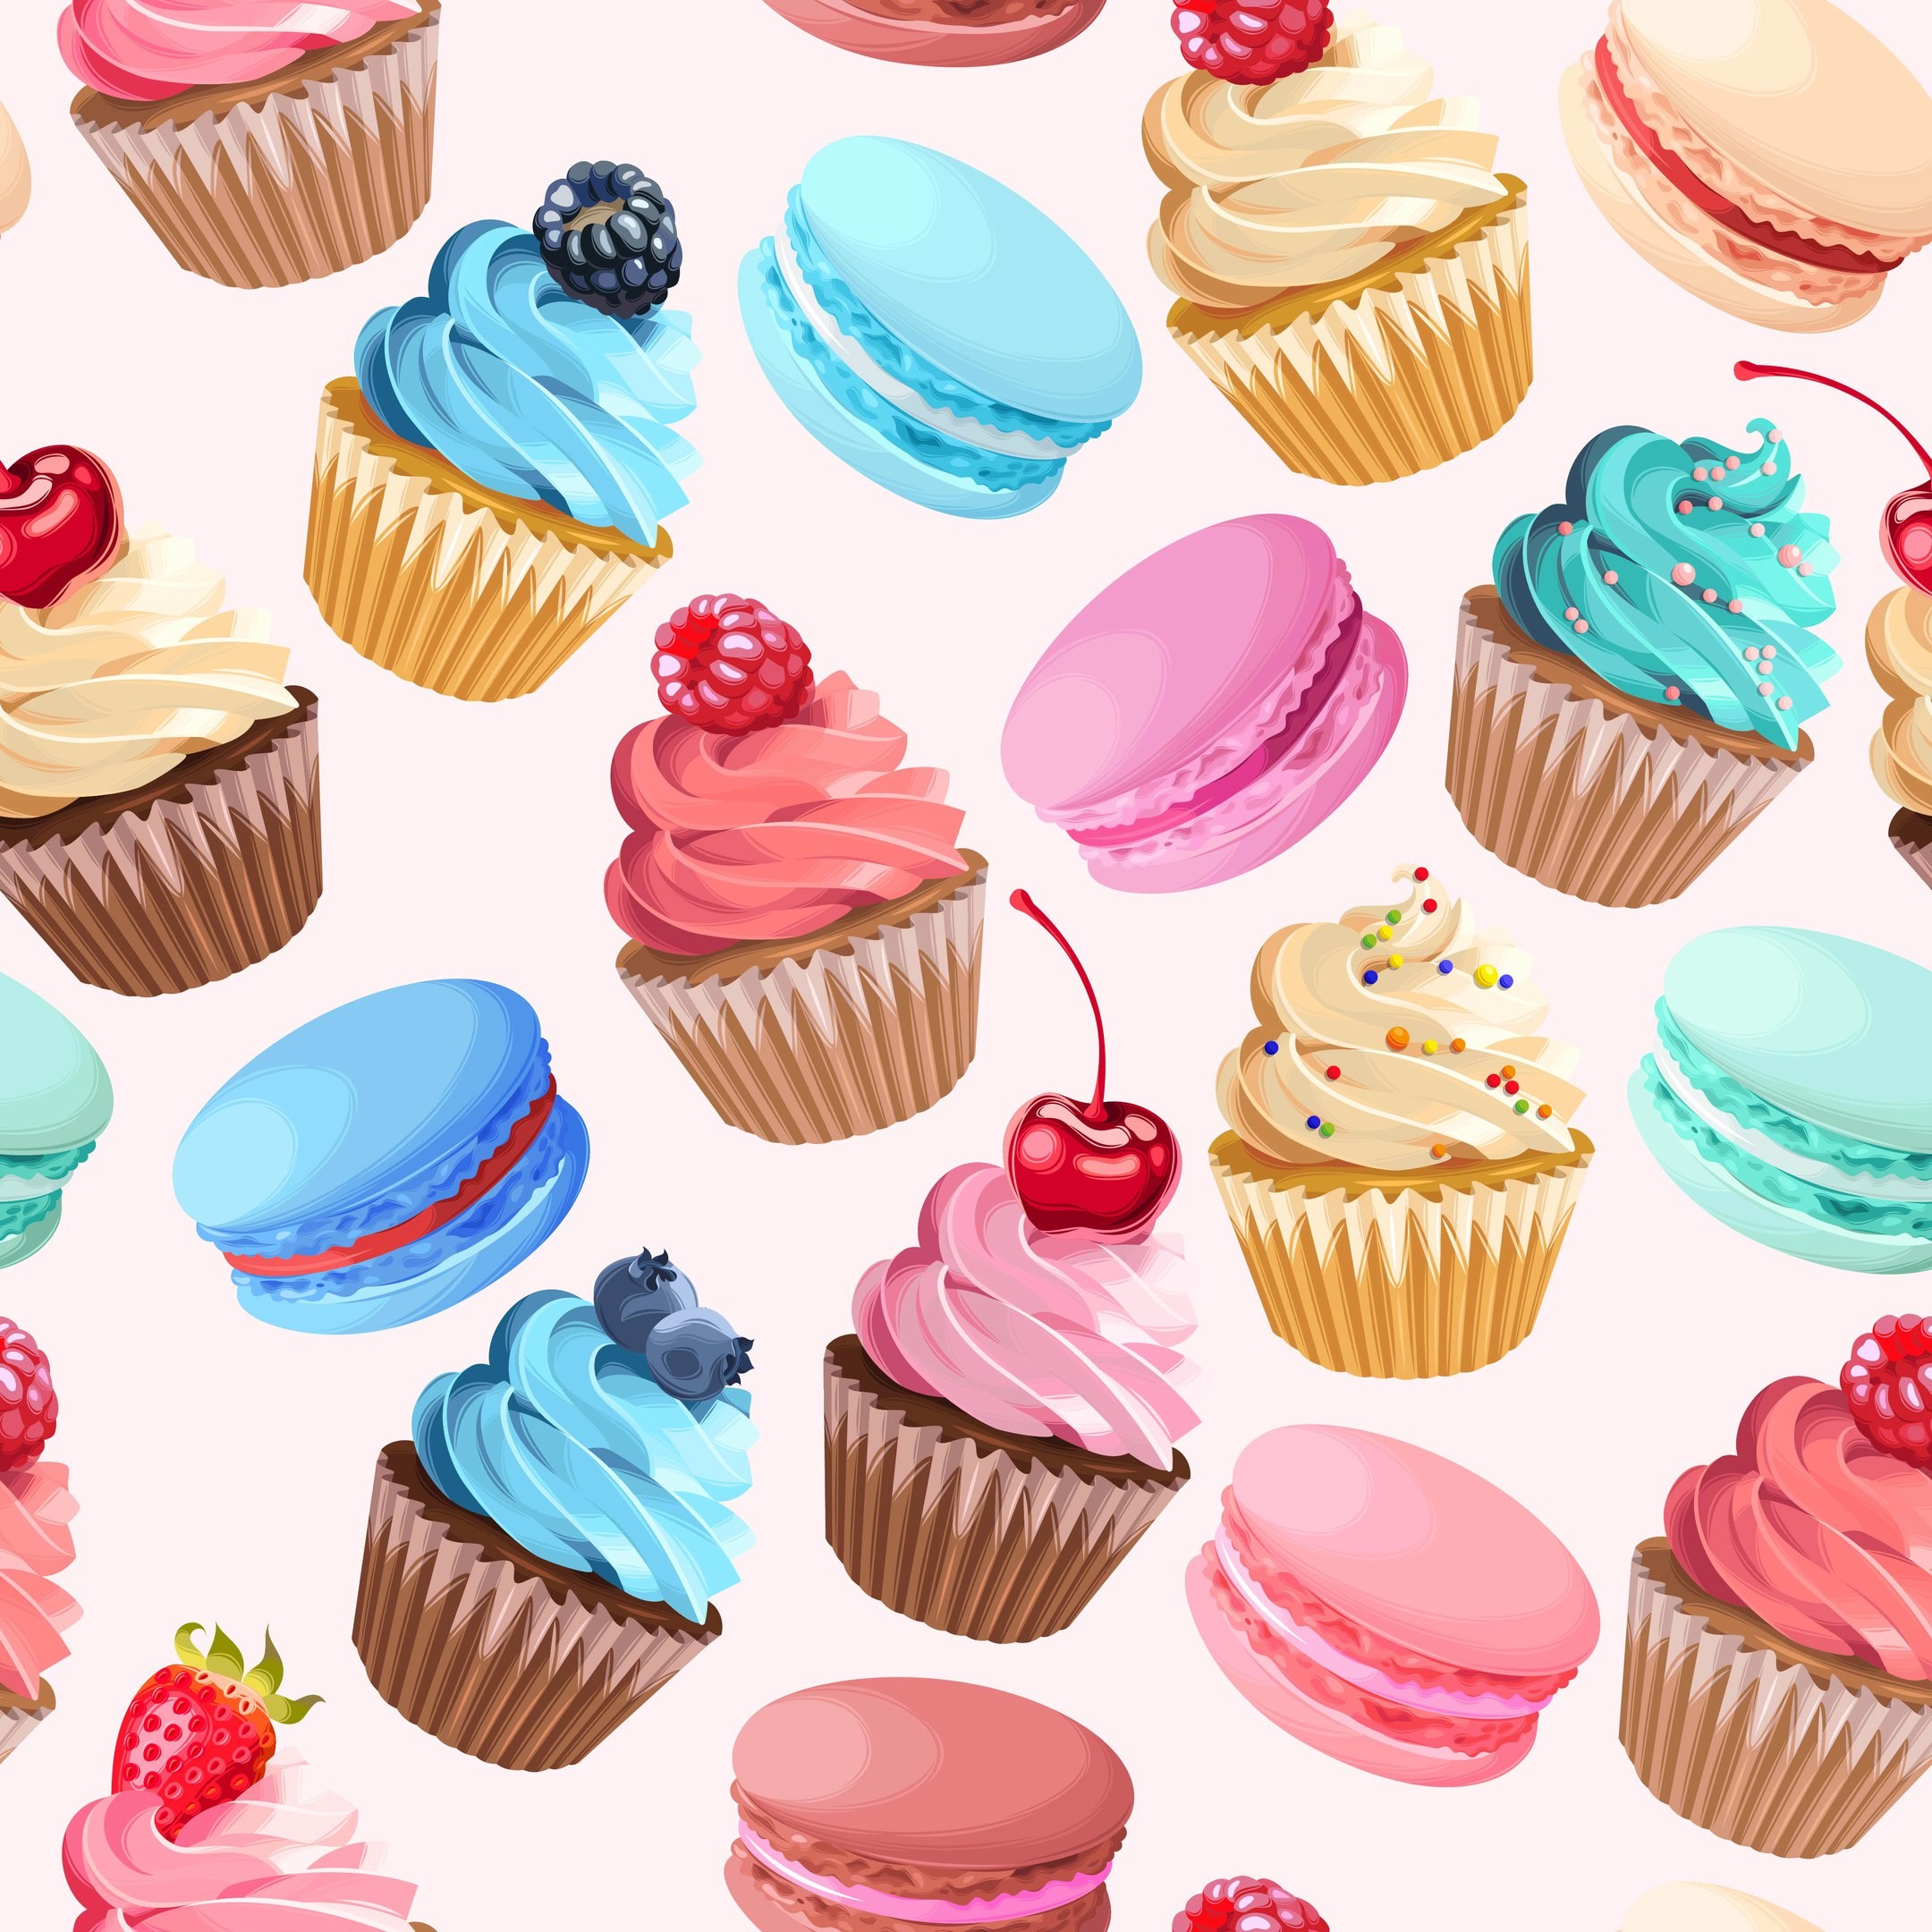 2160x2160 Buy Sweets Seamless Pattern by Greylilac on GraphicRiver. Varicolored  macarons and cupcakes vector seamless background